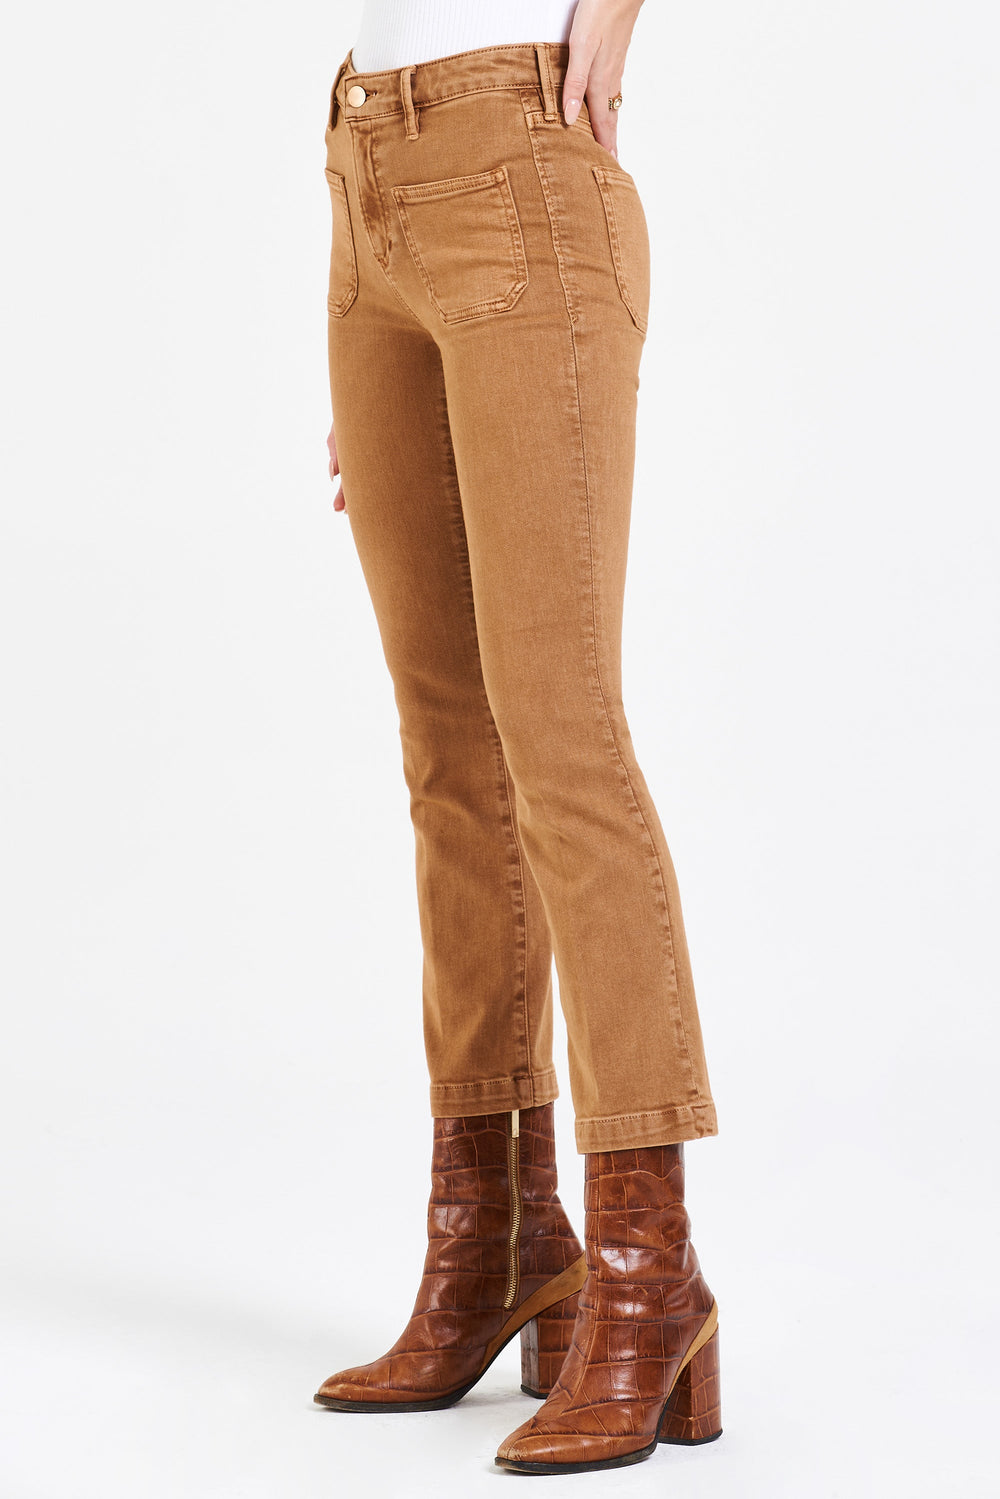 image of a female model wearing a JEANNE SUPER HIGH RISE CROPPED FLARE LEG JEANS BUTTERSCOTCH JEANS